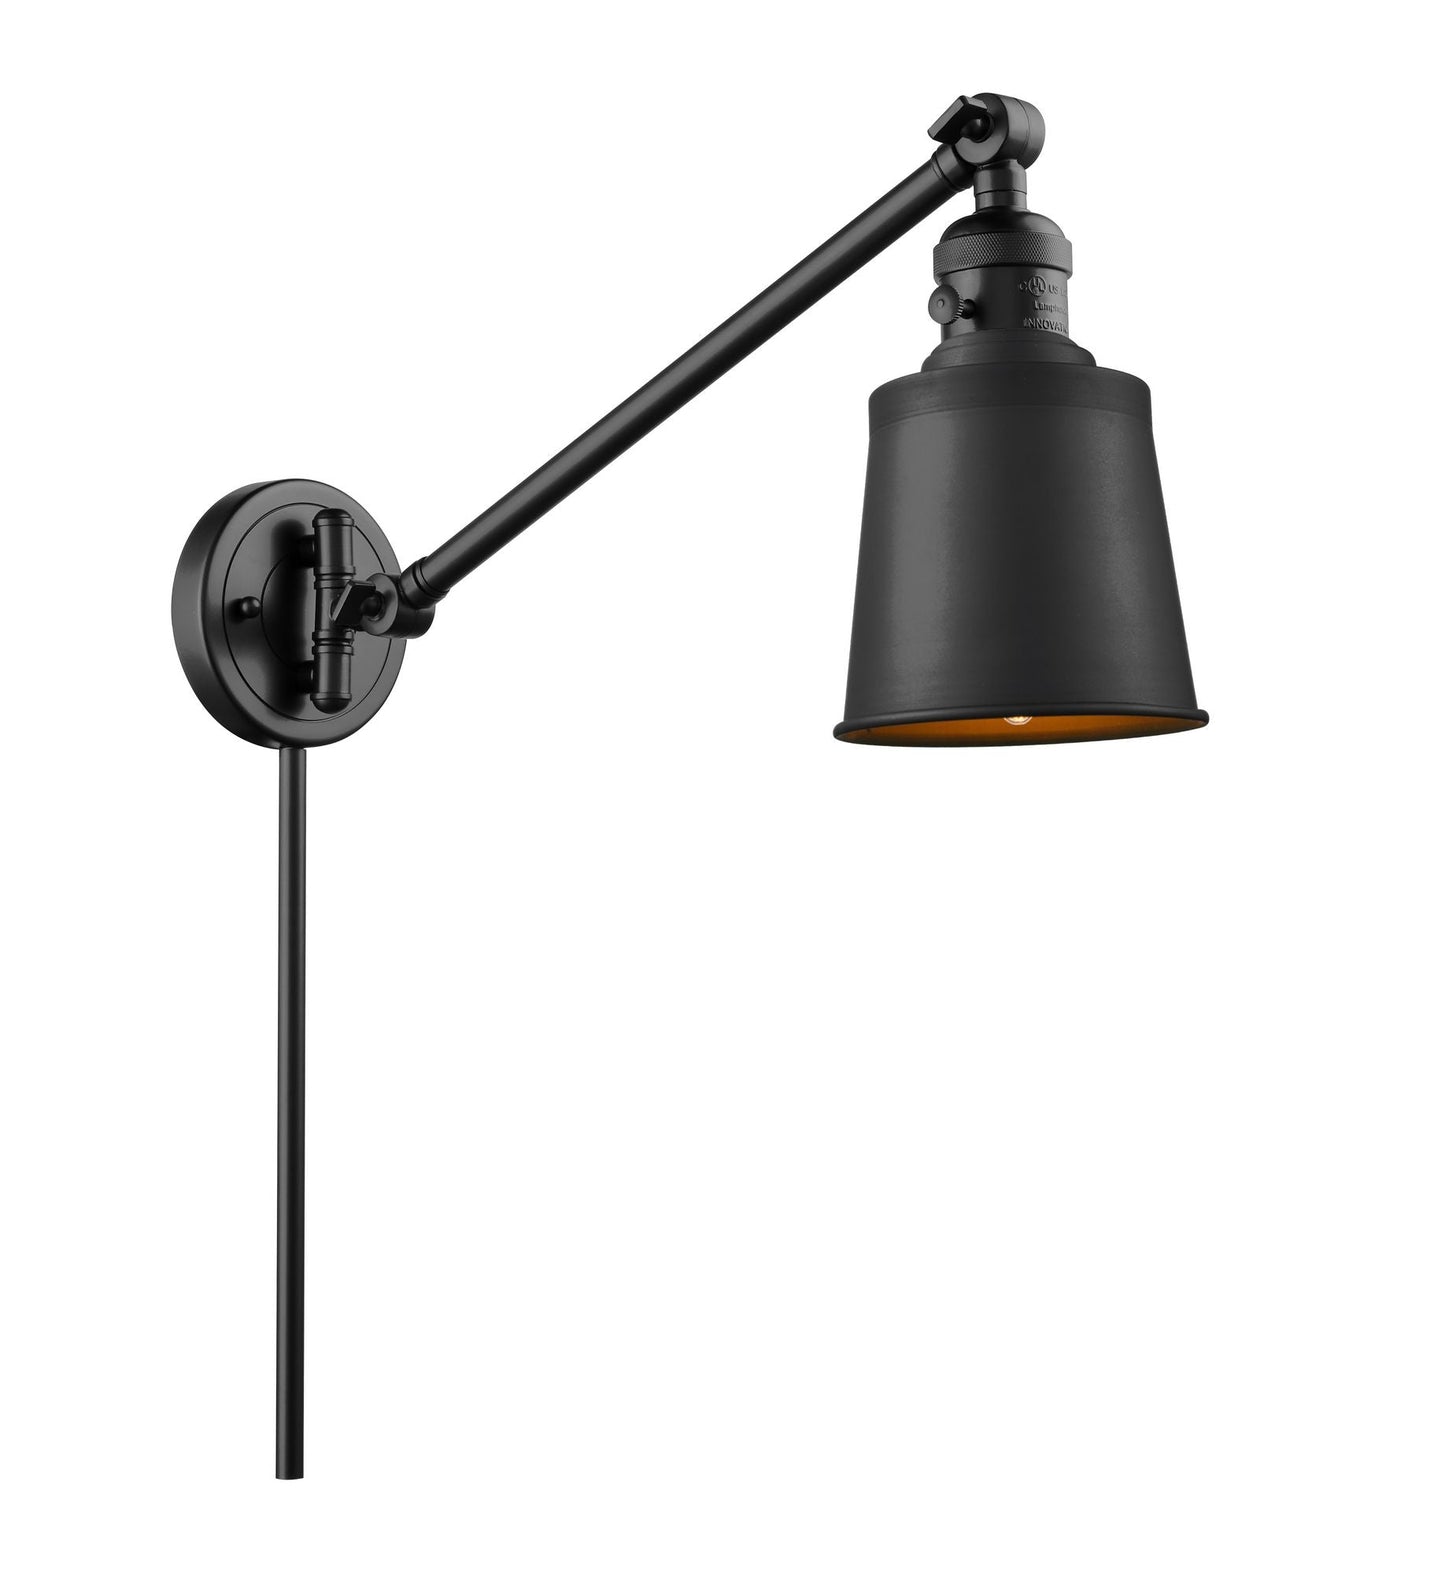 1-Light 8" Matte Black Addison Swing Arm With Switch - Cone Matte Black Glass - Incandesent Or LED Bulbs